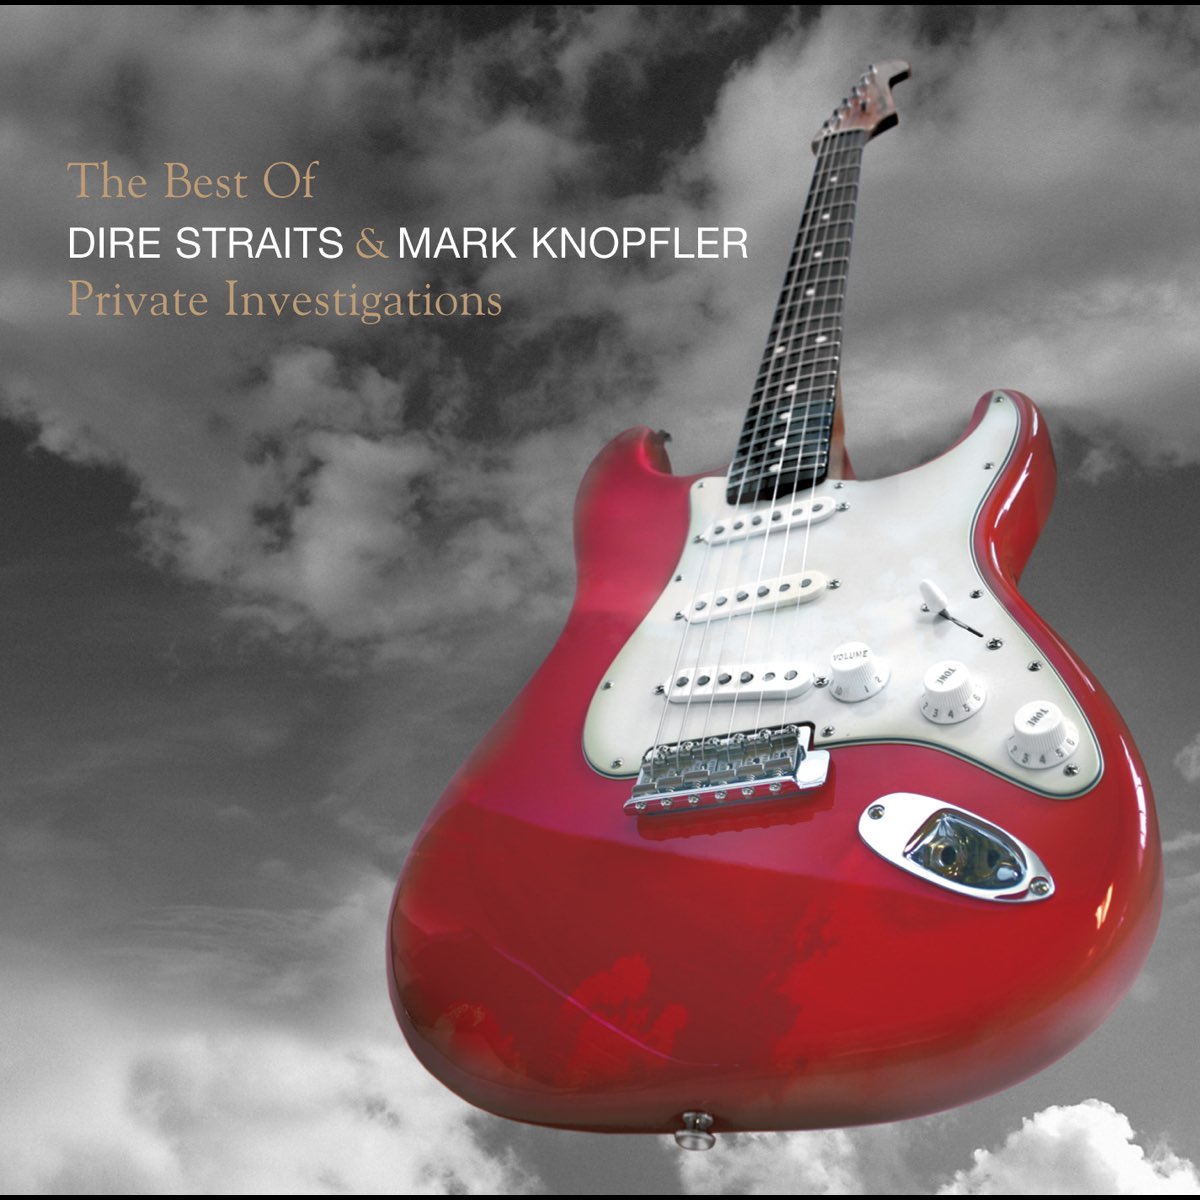 Рок Mercury Mark, Knopfler, Dire Straits - Private Investigations - The Best Of (Limited Red Vinyl 2LP) midtown living well is the best revenge 1 cd